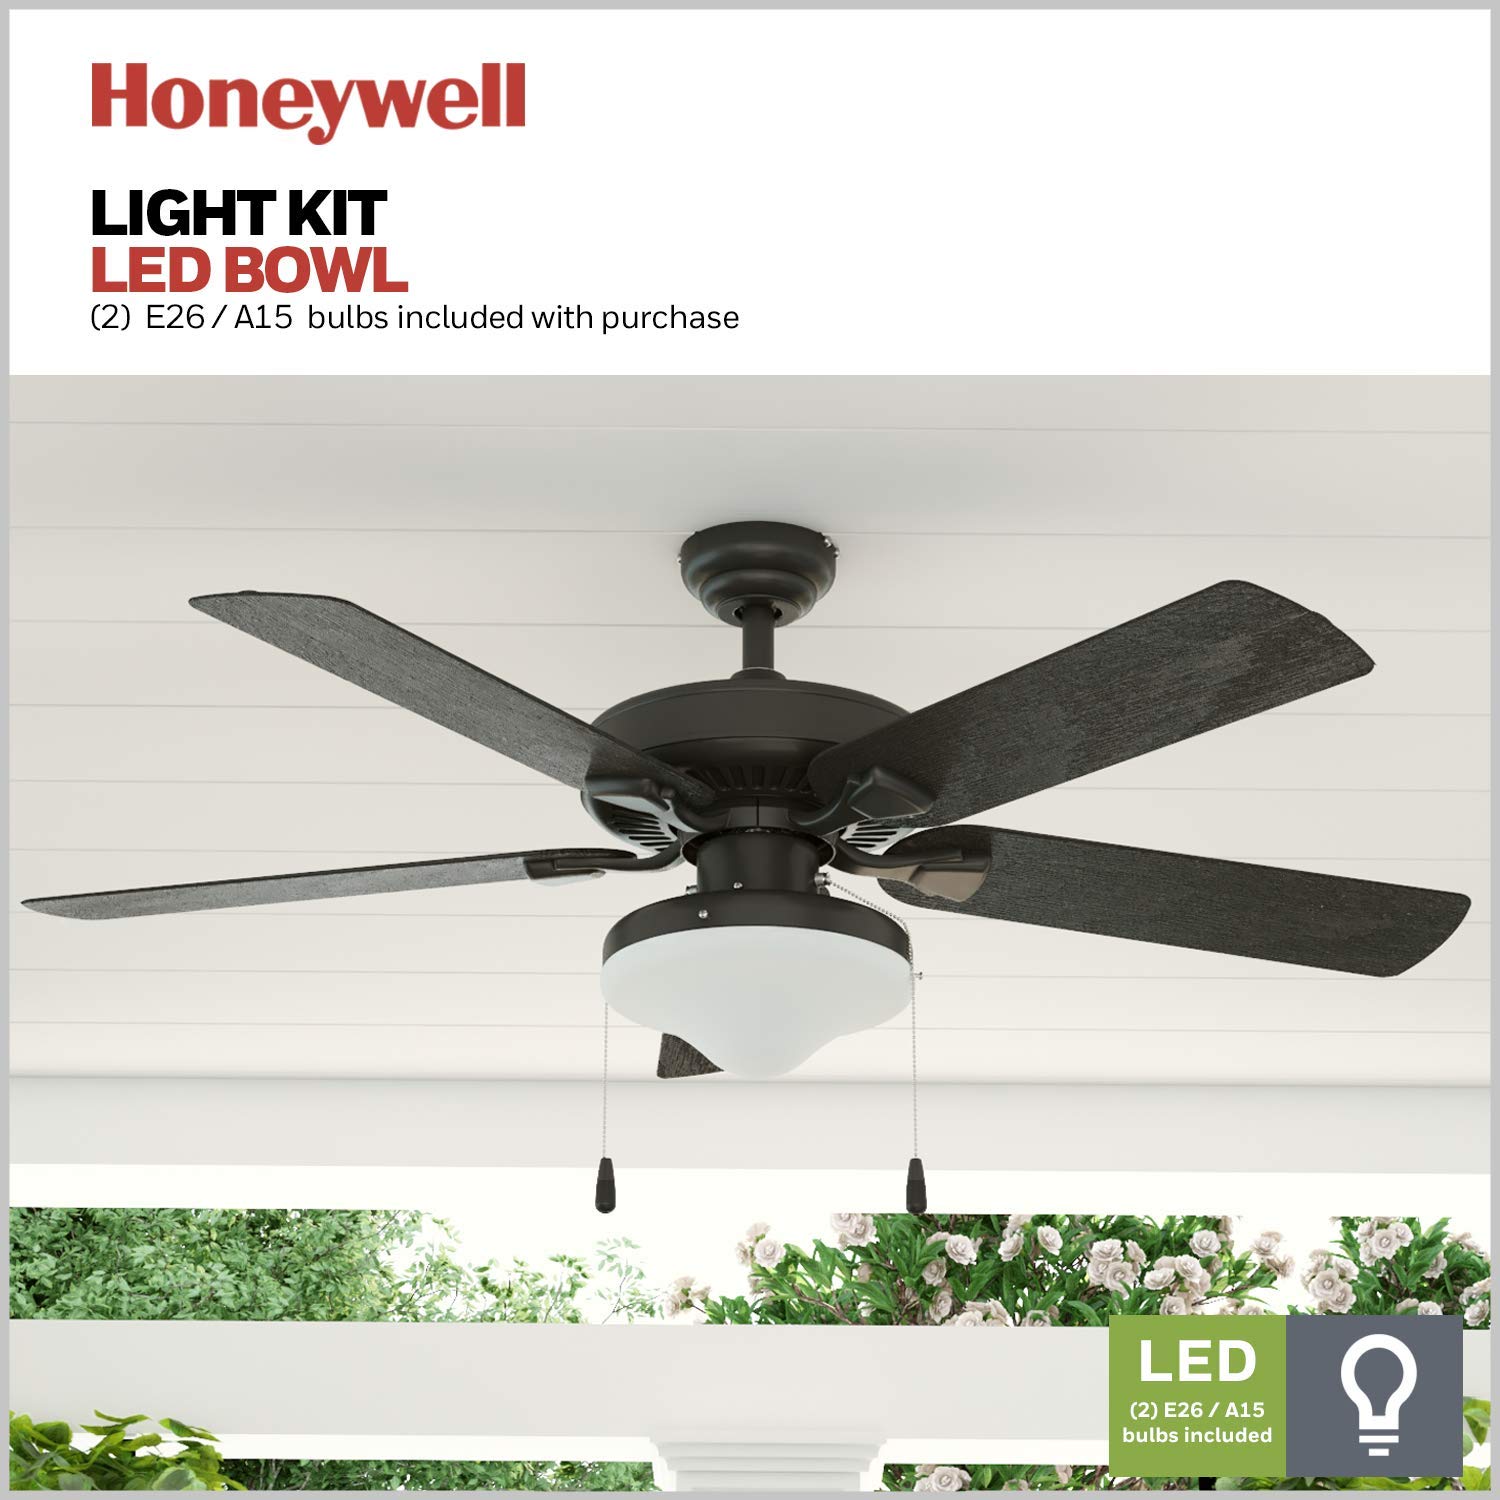 Honeywell Ceiling Fans Belmar, 52 Inch Traditional Indoor Outdoor LED Ceiling Fan with Light, Pull Chain, Three Mounting Options, ETL Damp Rated, Reversible Motor - 50512-01 (Bronze)